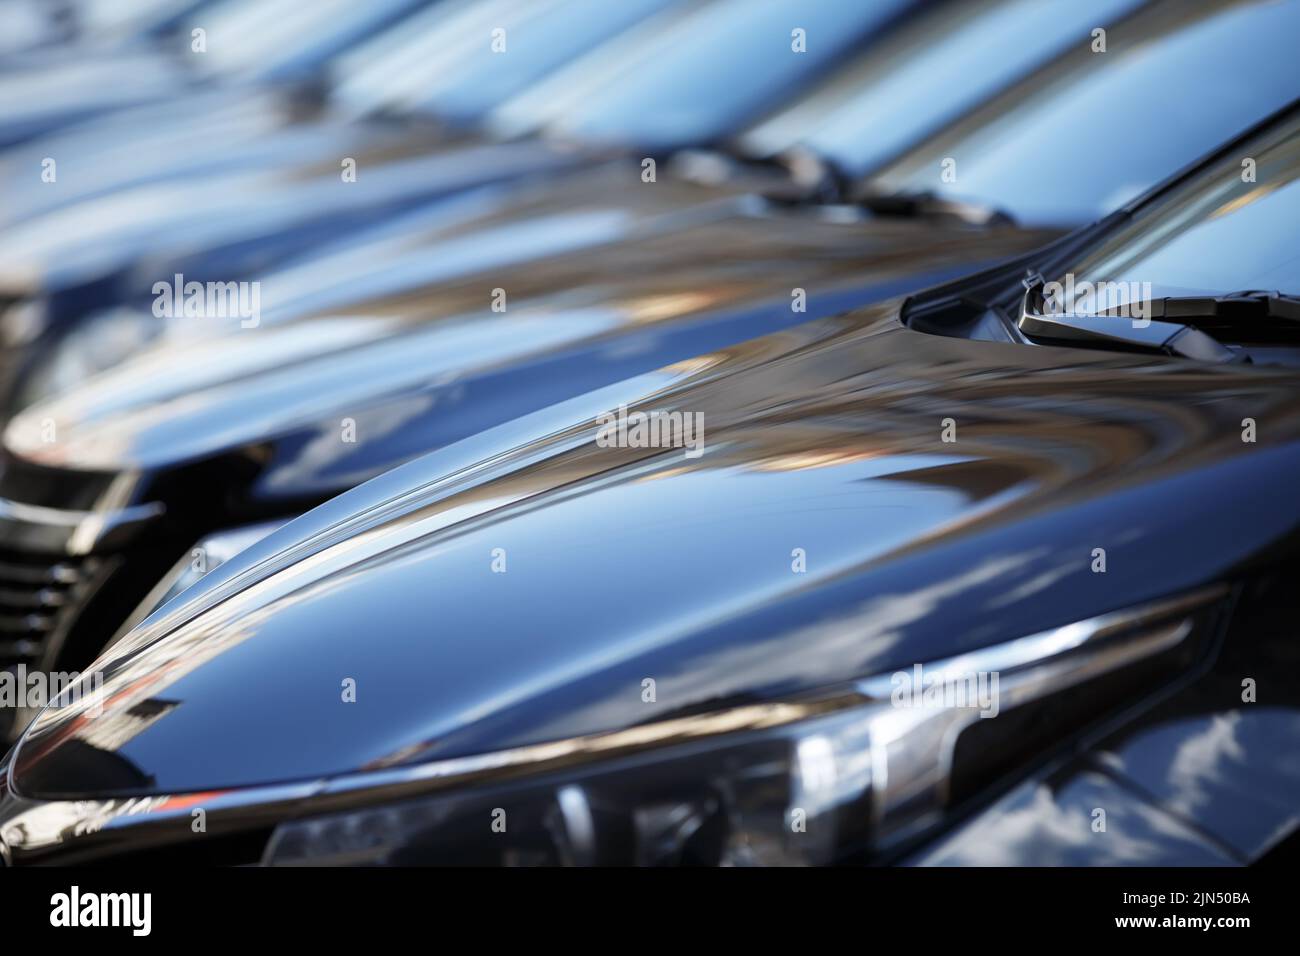 The hood of the car. Row of cars on a parking lot. Black sedan cars standing in a row.  Fleet of generic modern cars. Transportation. Many similar new Stock Photo